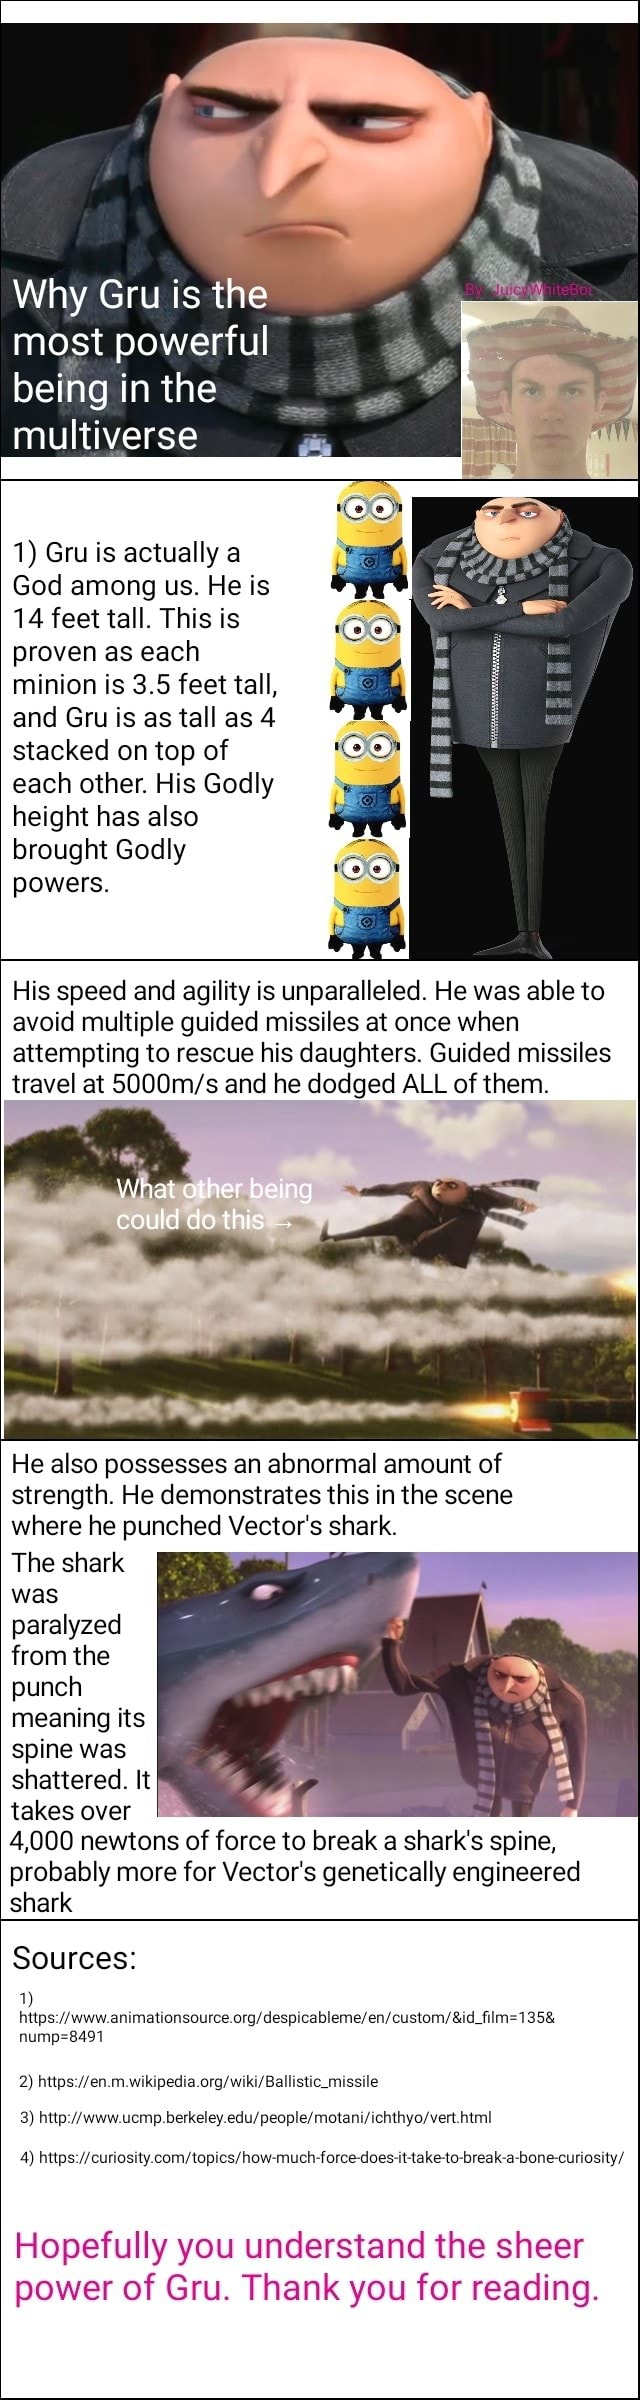 Why Gru Is The Most Powerful Being In The Multiverse 1 Gru Is Actually A God Among Us He Is R 14feet Tall This Is Ng Proven As Each Minion Is